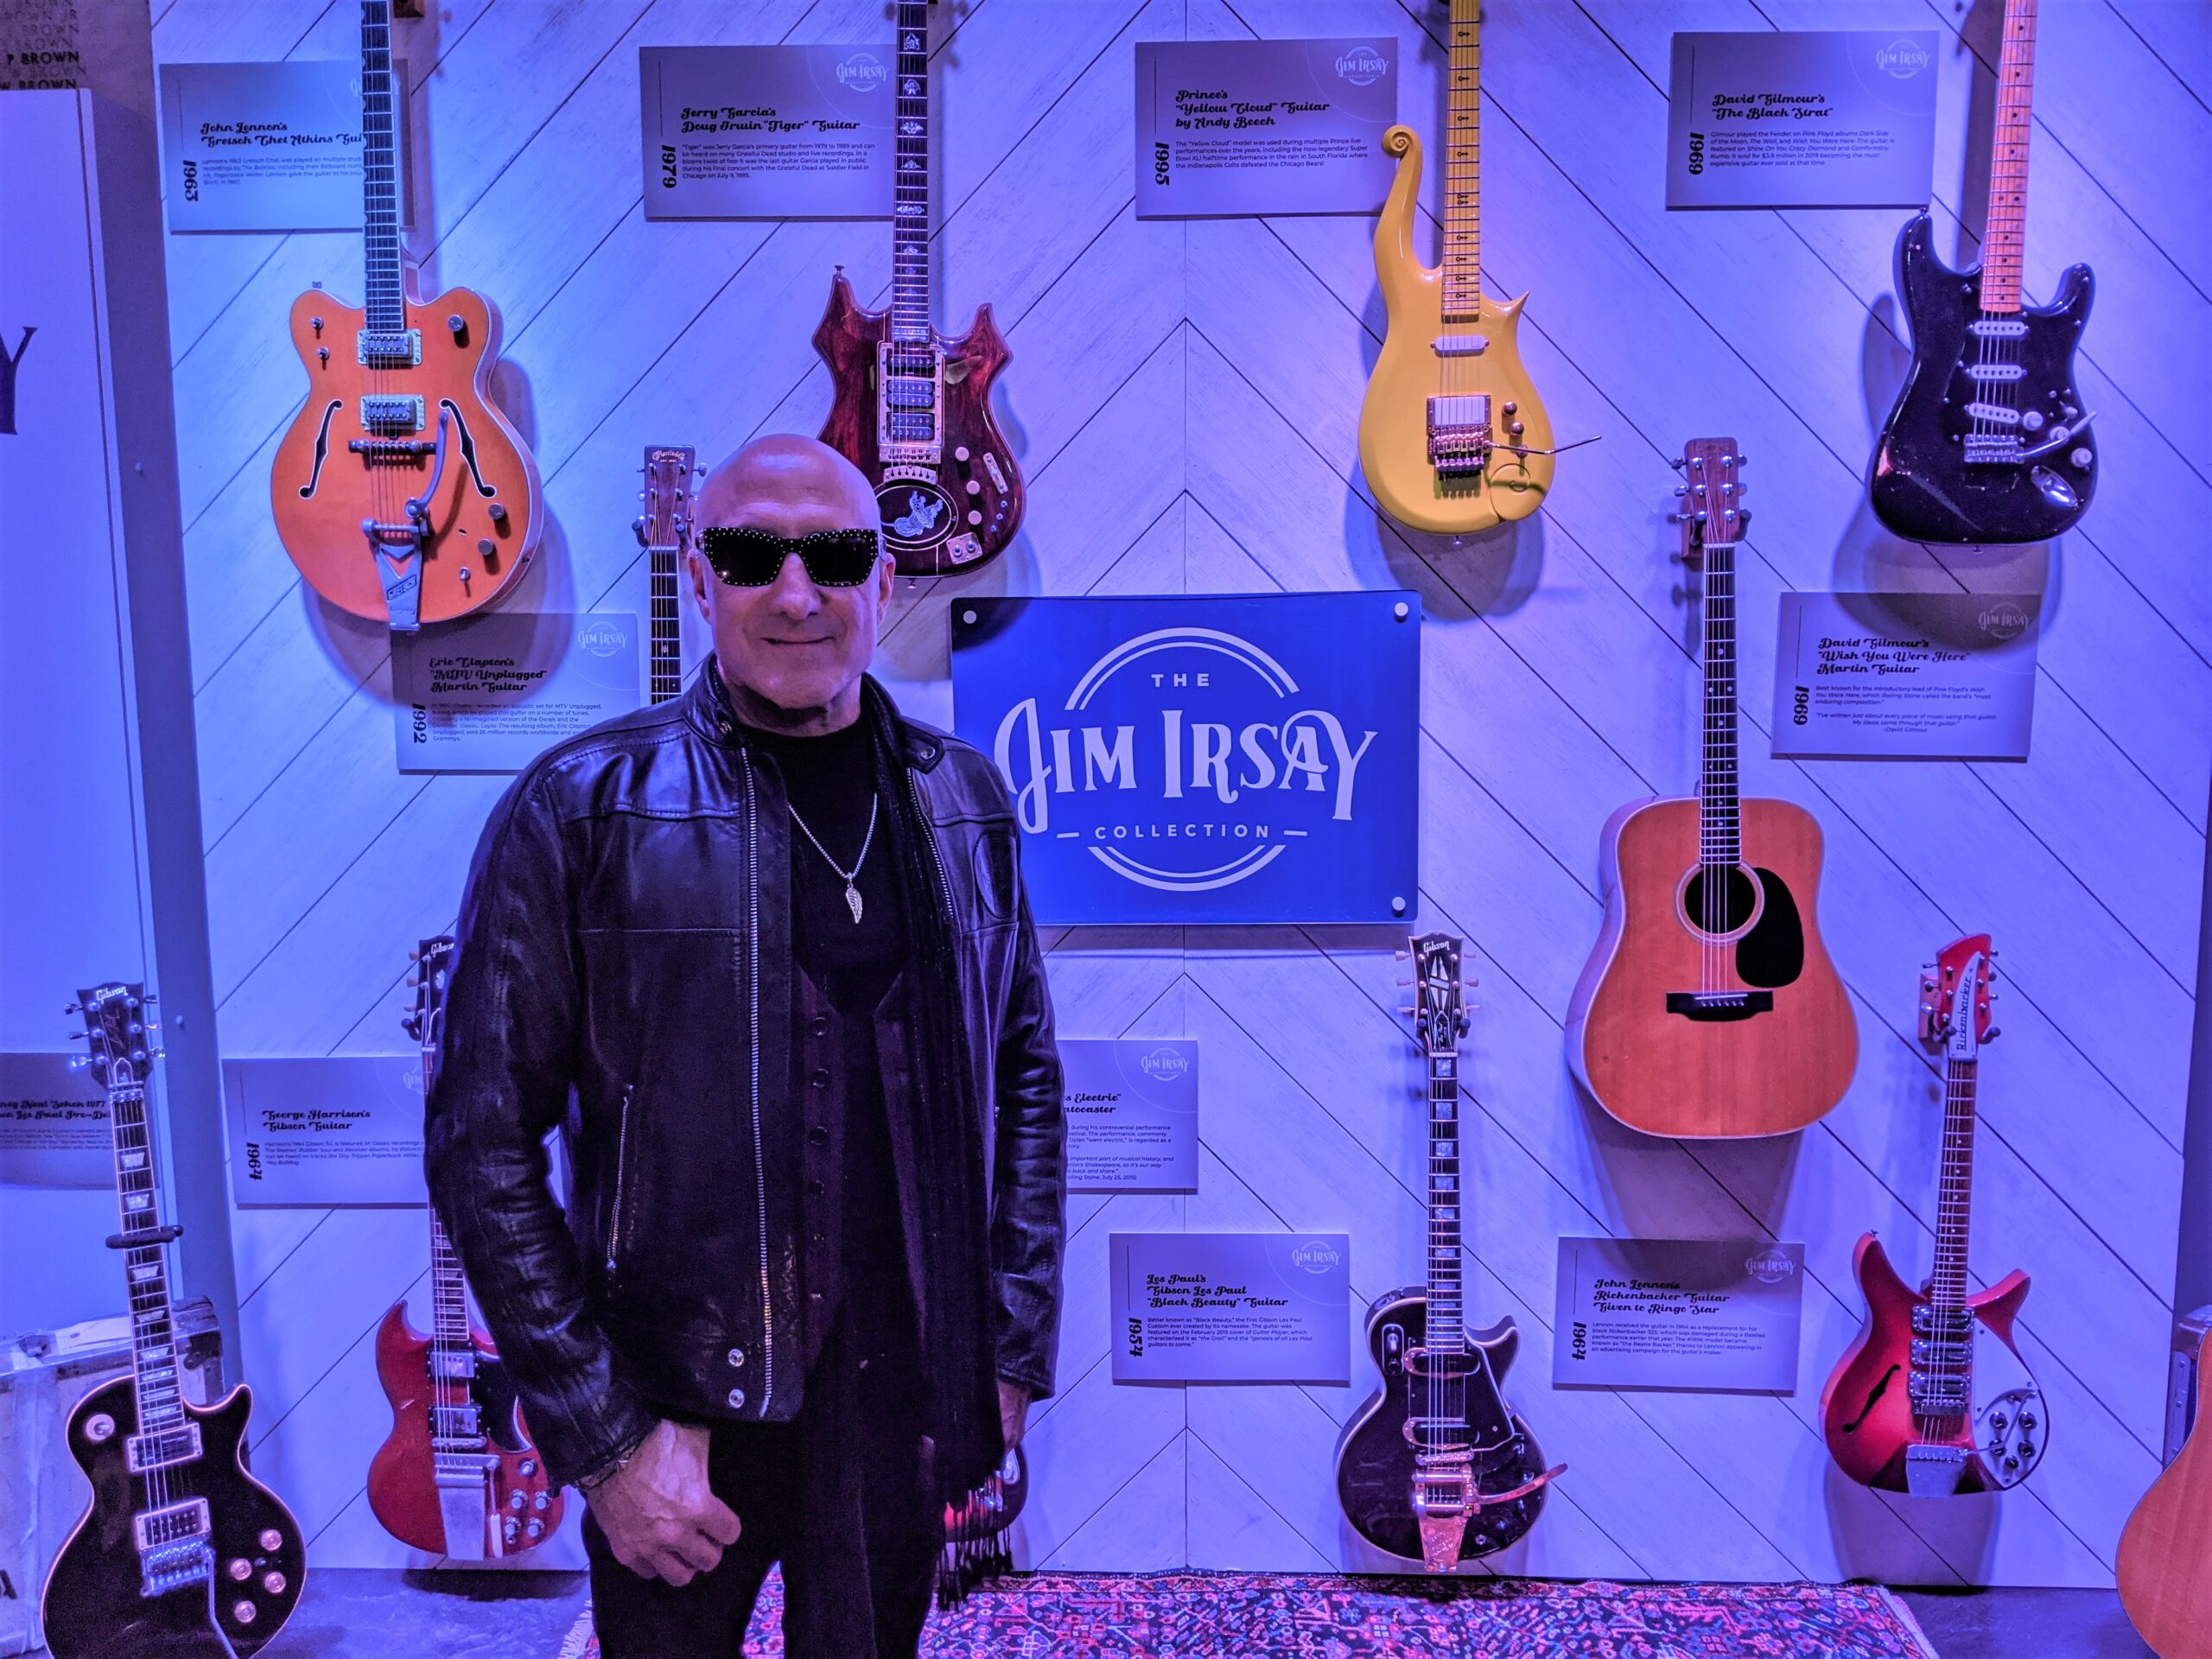 Kenny Aronoff and Jim Irsay Collection event